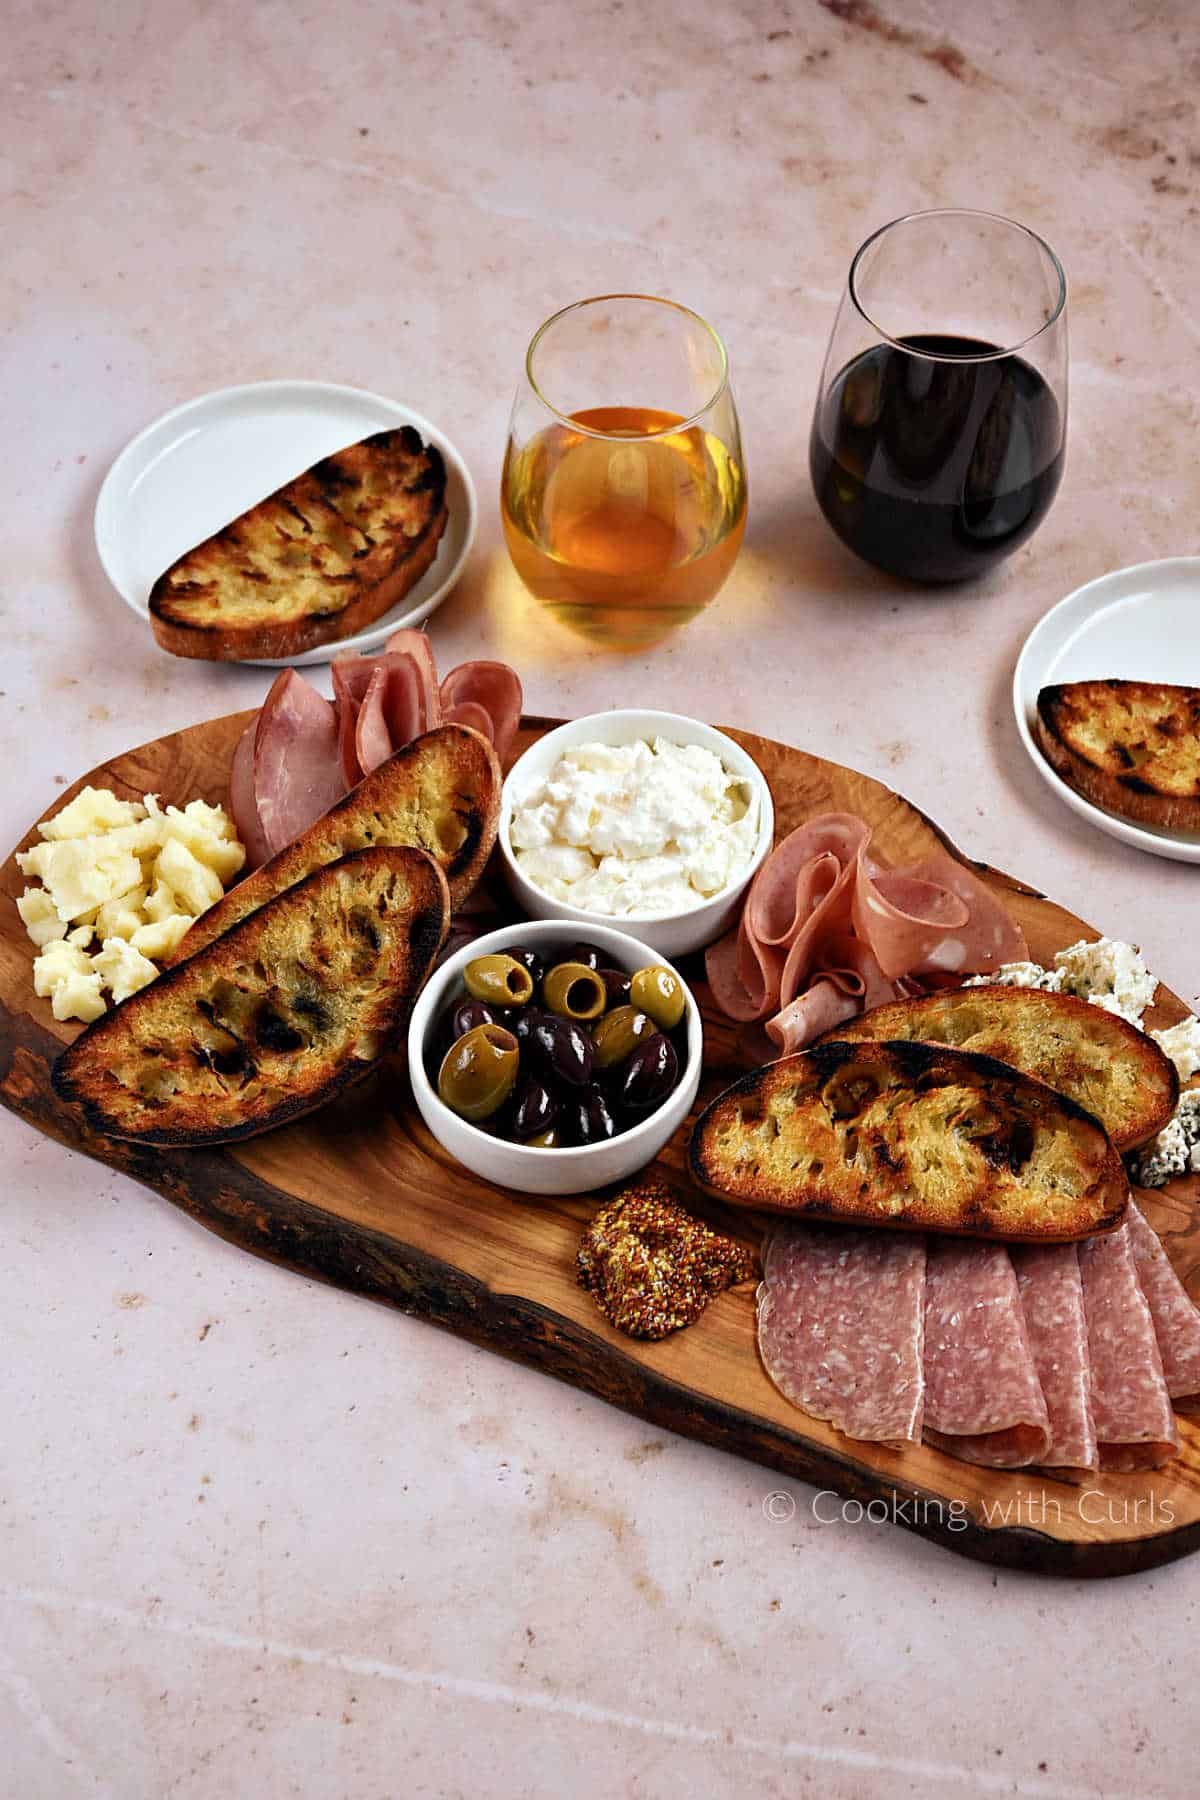 Italian deli meats and cheeses on a wood board with olives, mustard, and grilled bread.